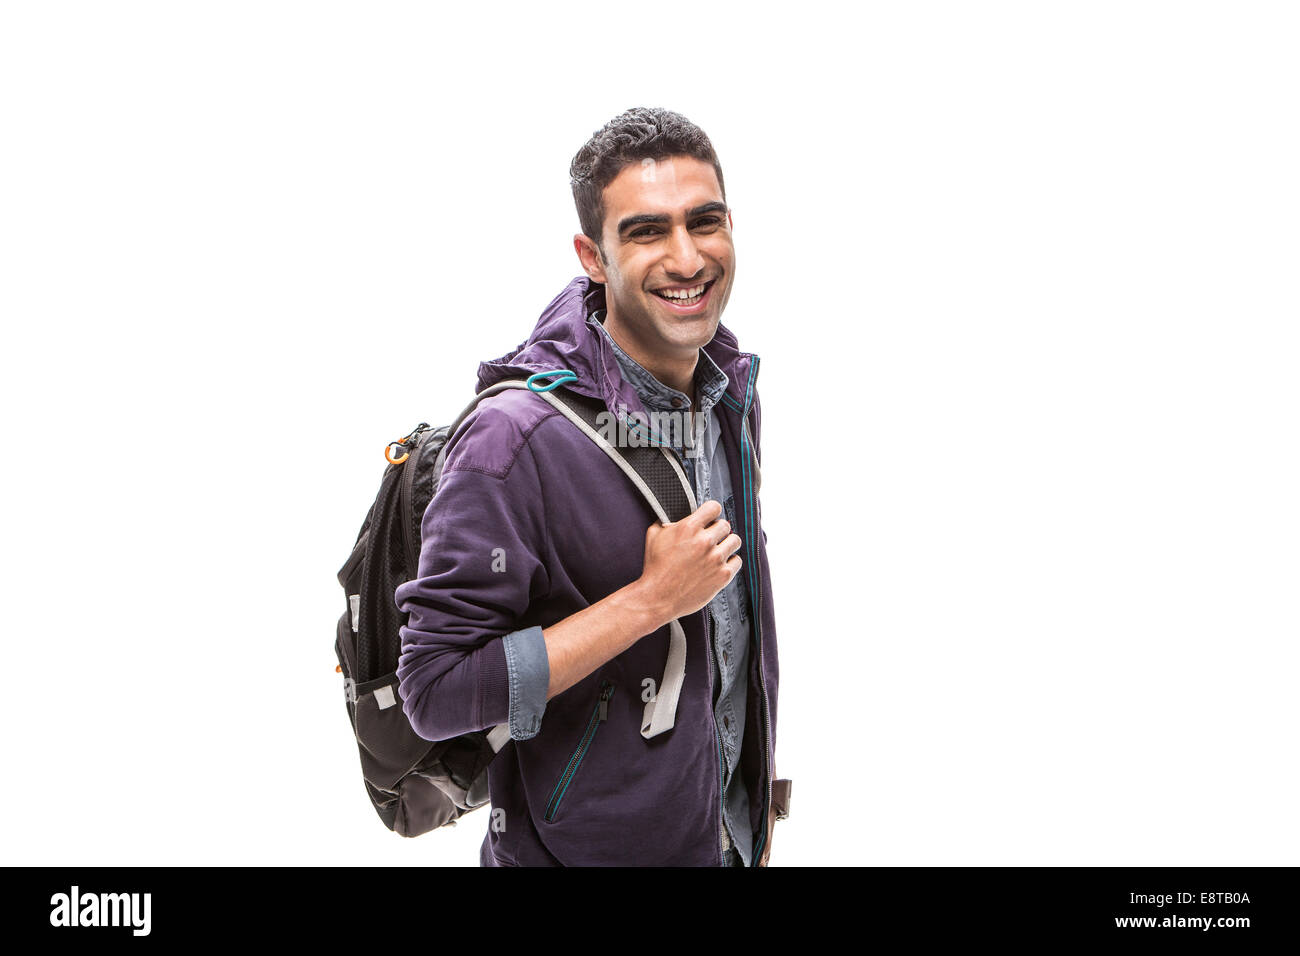 Indian student carrying backpack Stock Photo